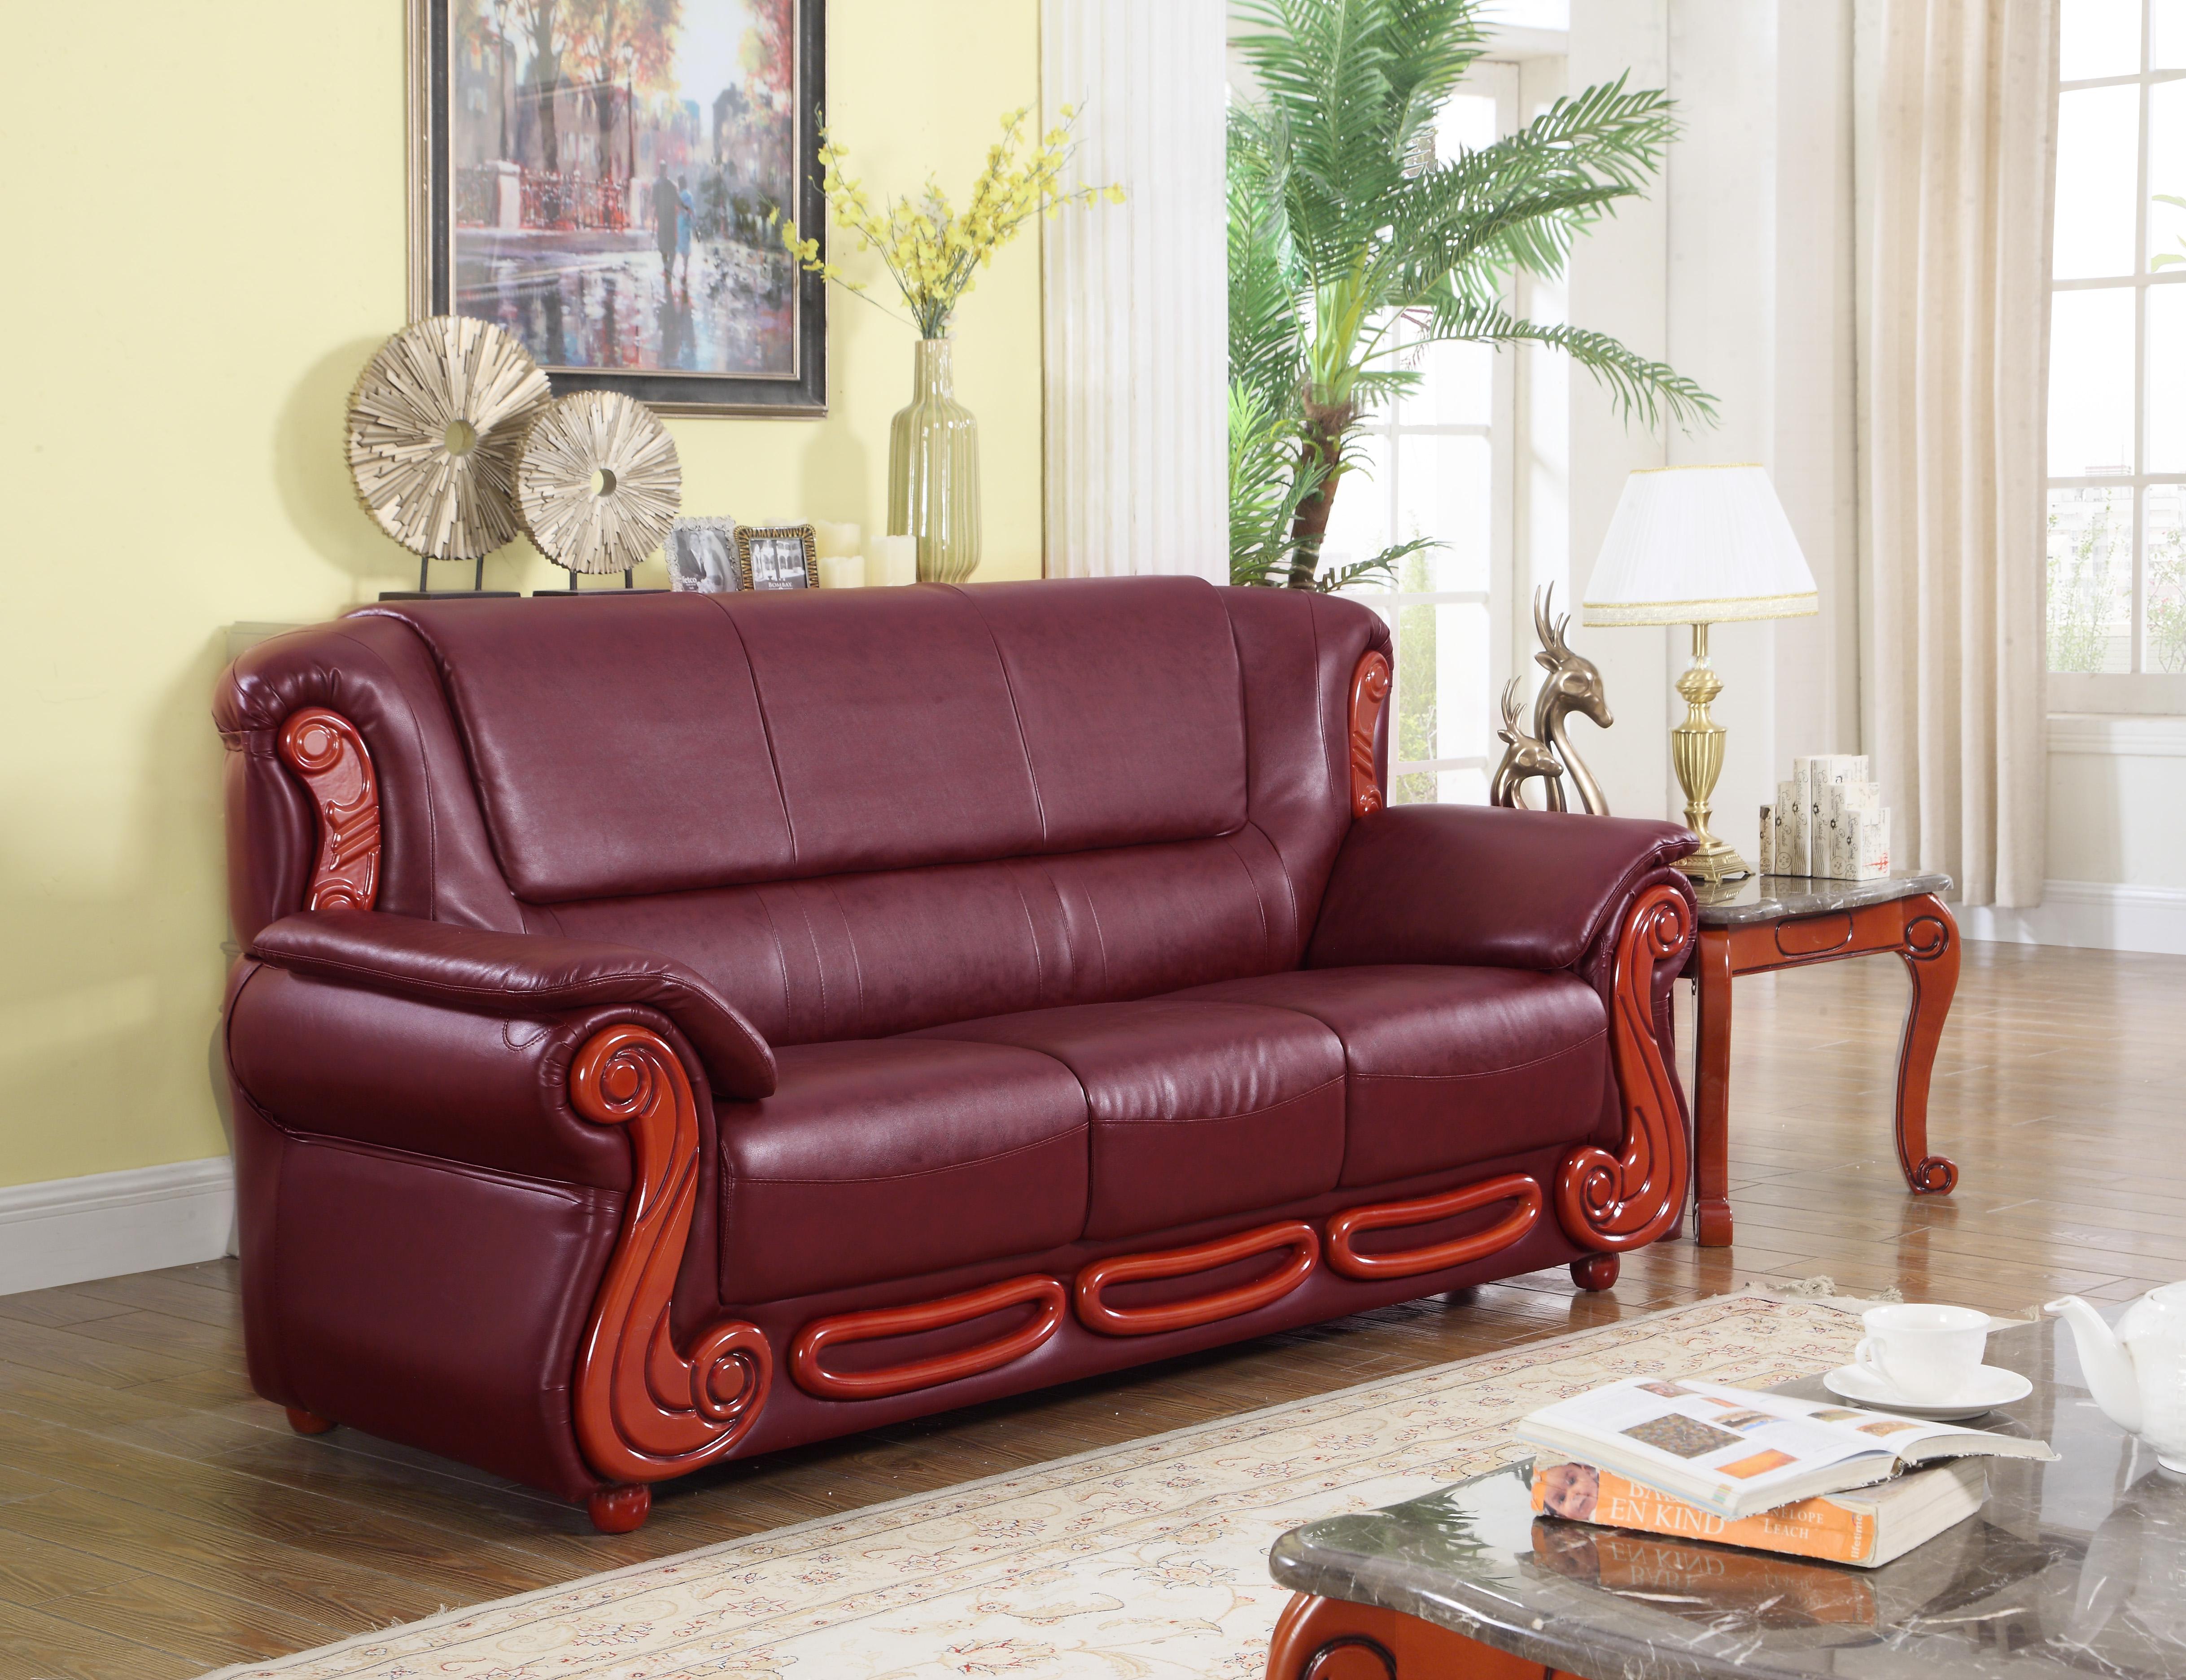 

    
Meridian 632 Bella Burgundy Bonded Leather Living Room Set 2 Traditional Classic
